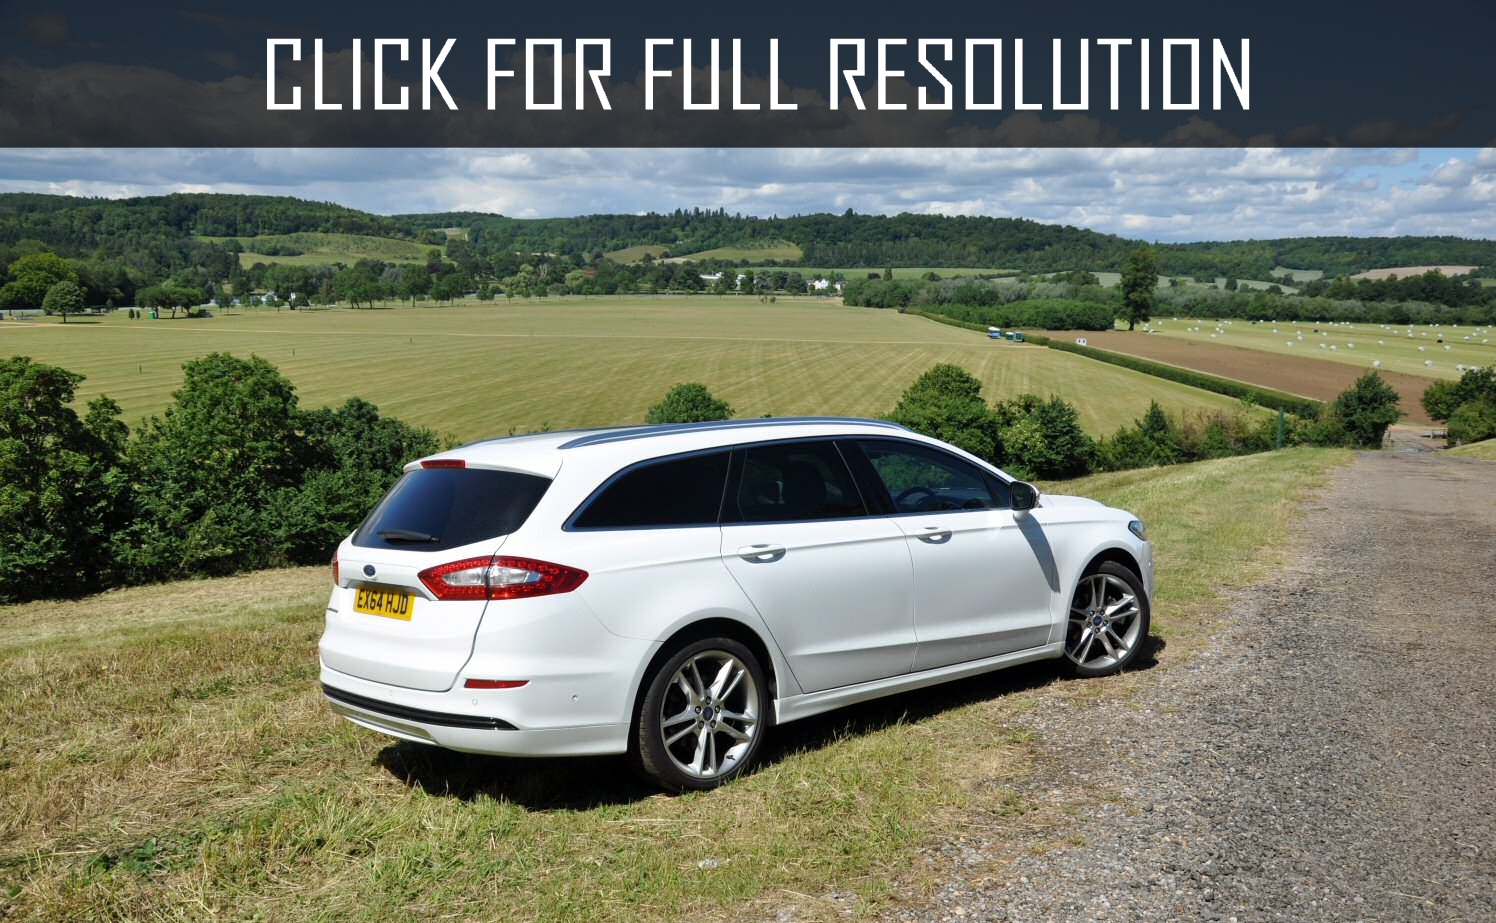 16 Ford Mondeo Estate Best Image Gallery 5 15 Share And Download